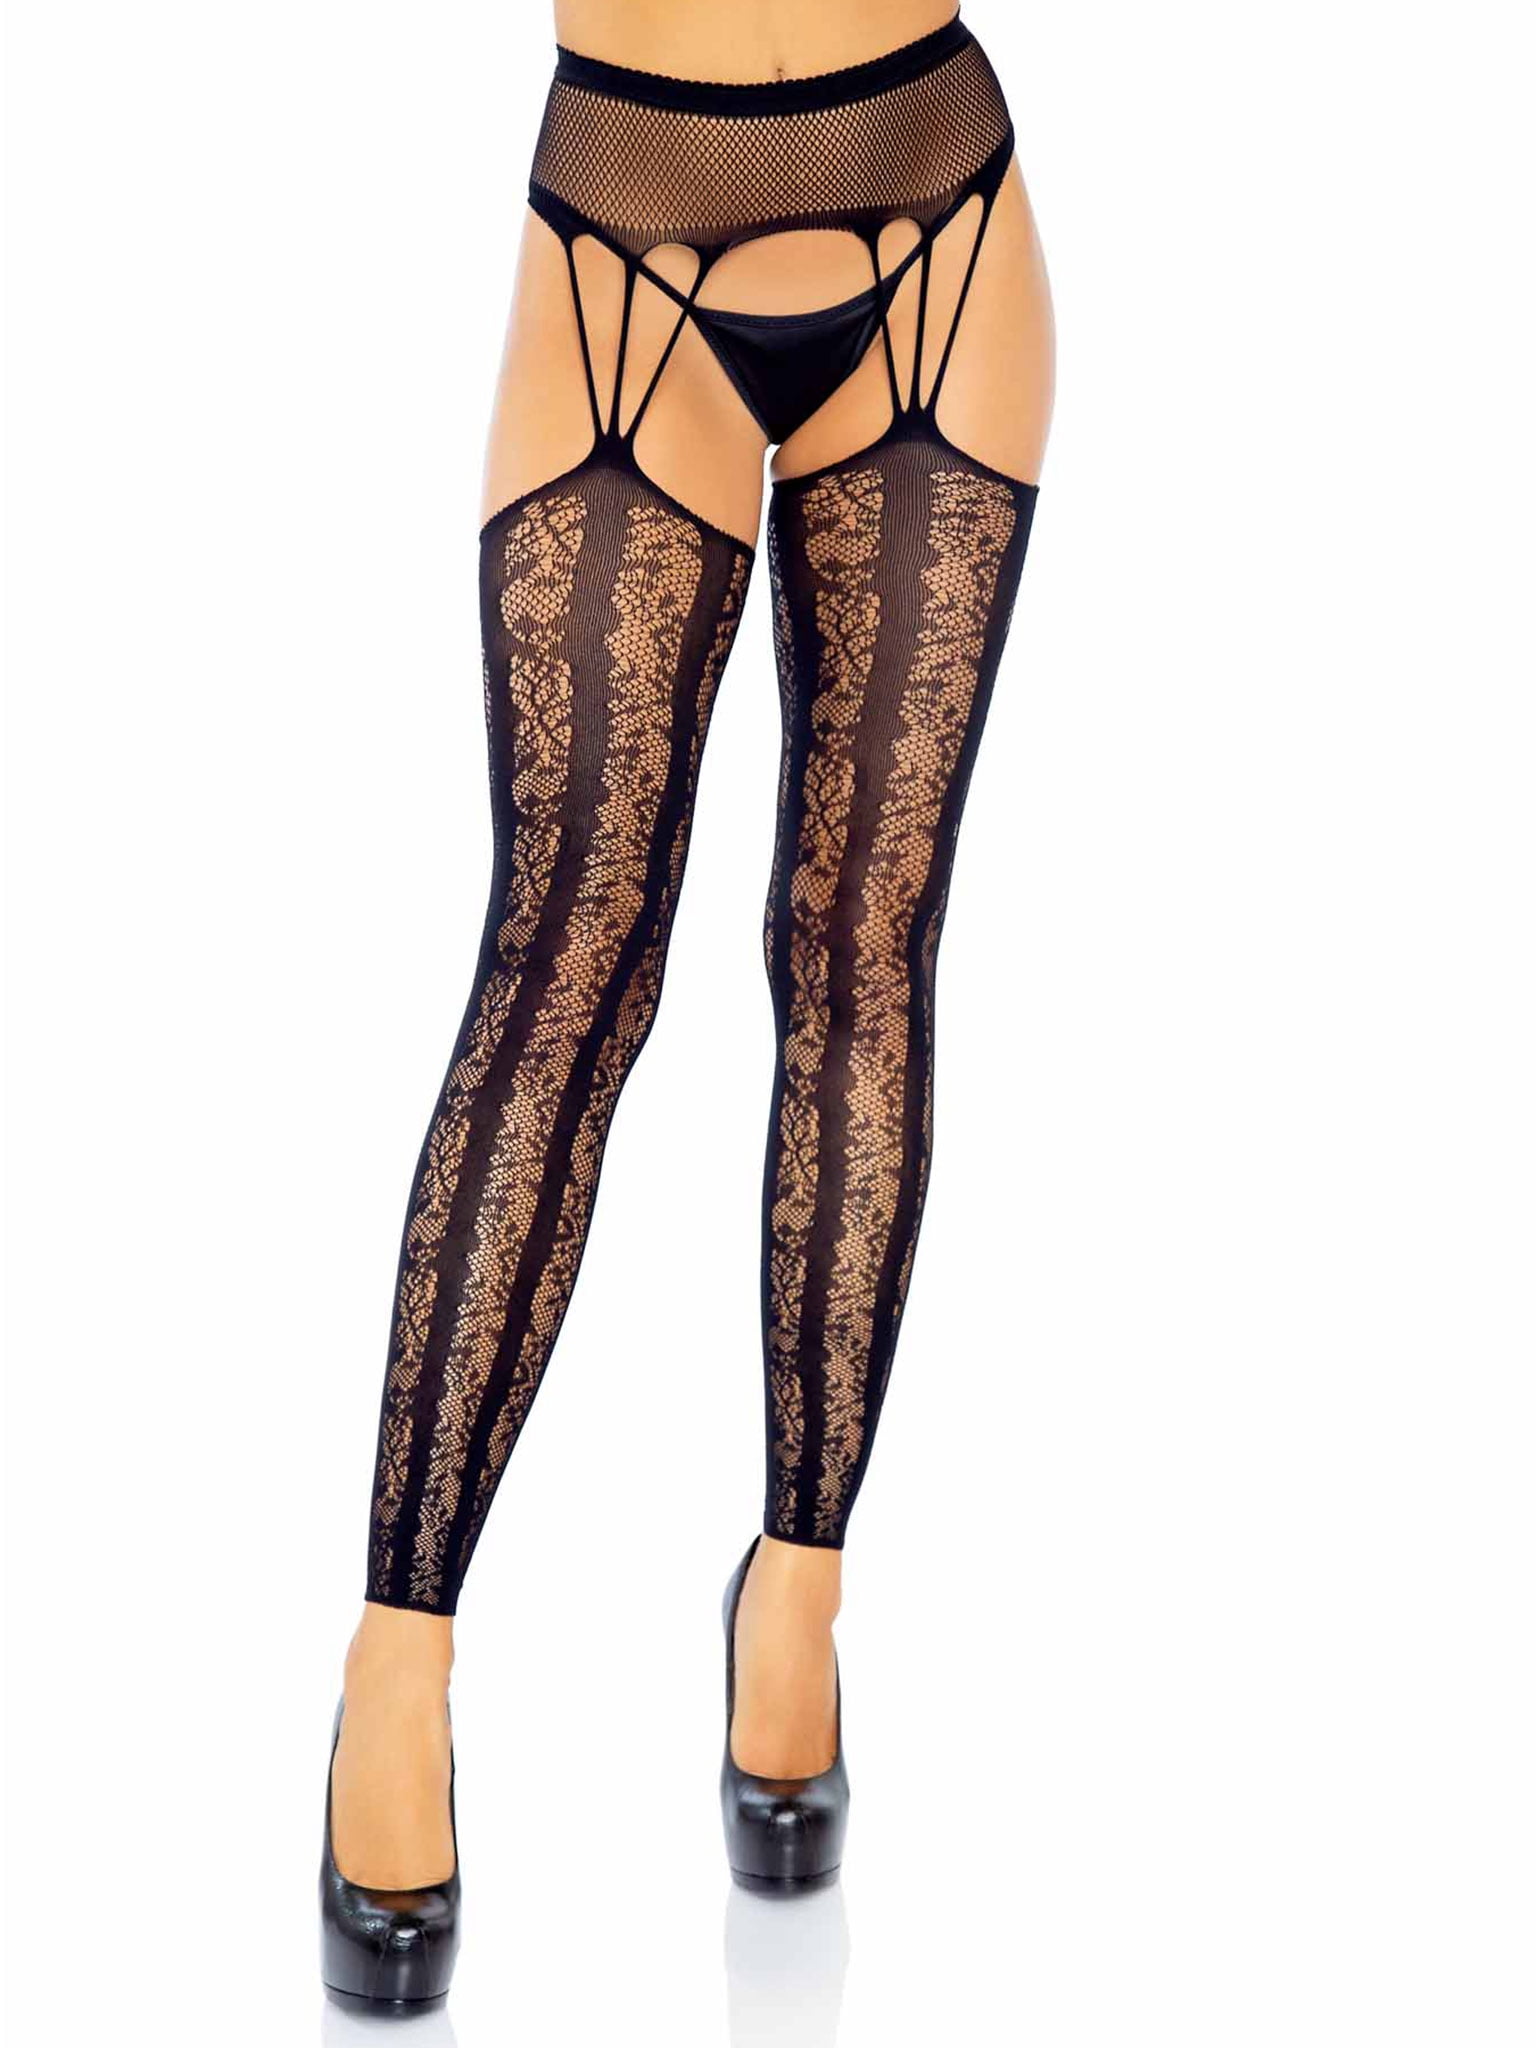 Leg Avenue Striped Lace Footless Stockings Floral Lace Tights With Attached  Garter Belt For Women 